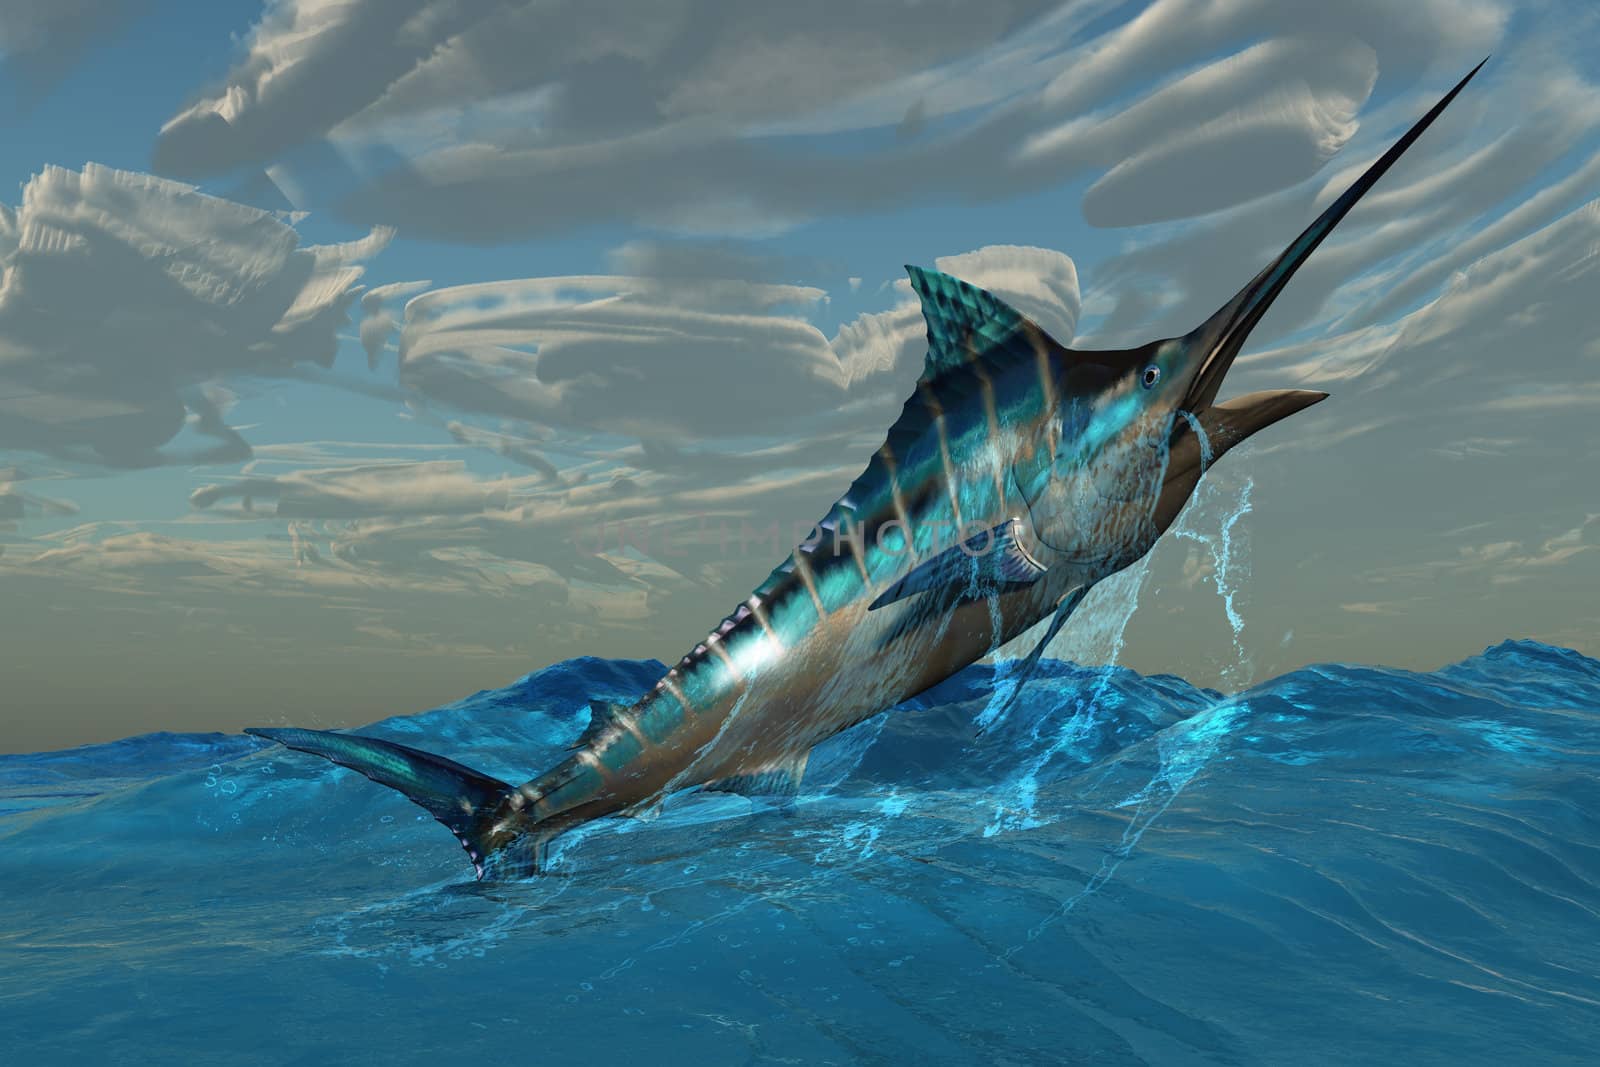 An iridescent Blue Marlin bursts from ocean waters with with marvelous energy.